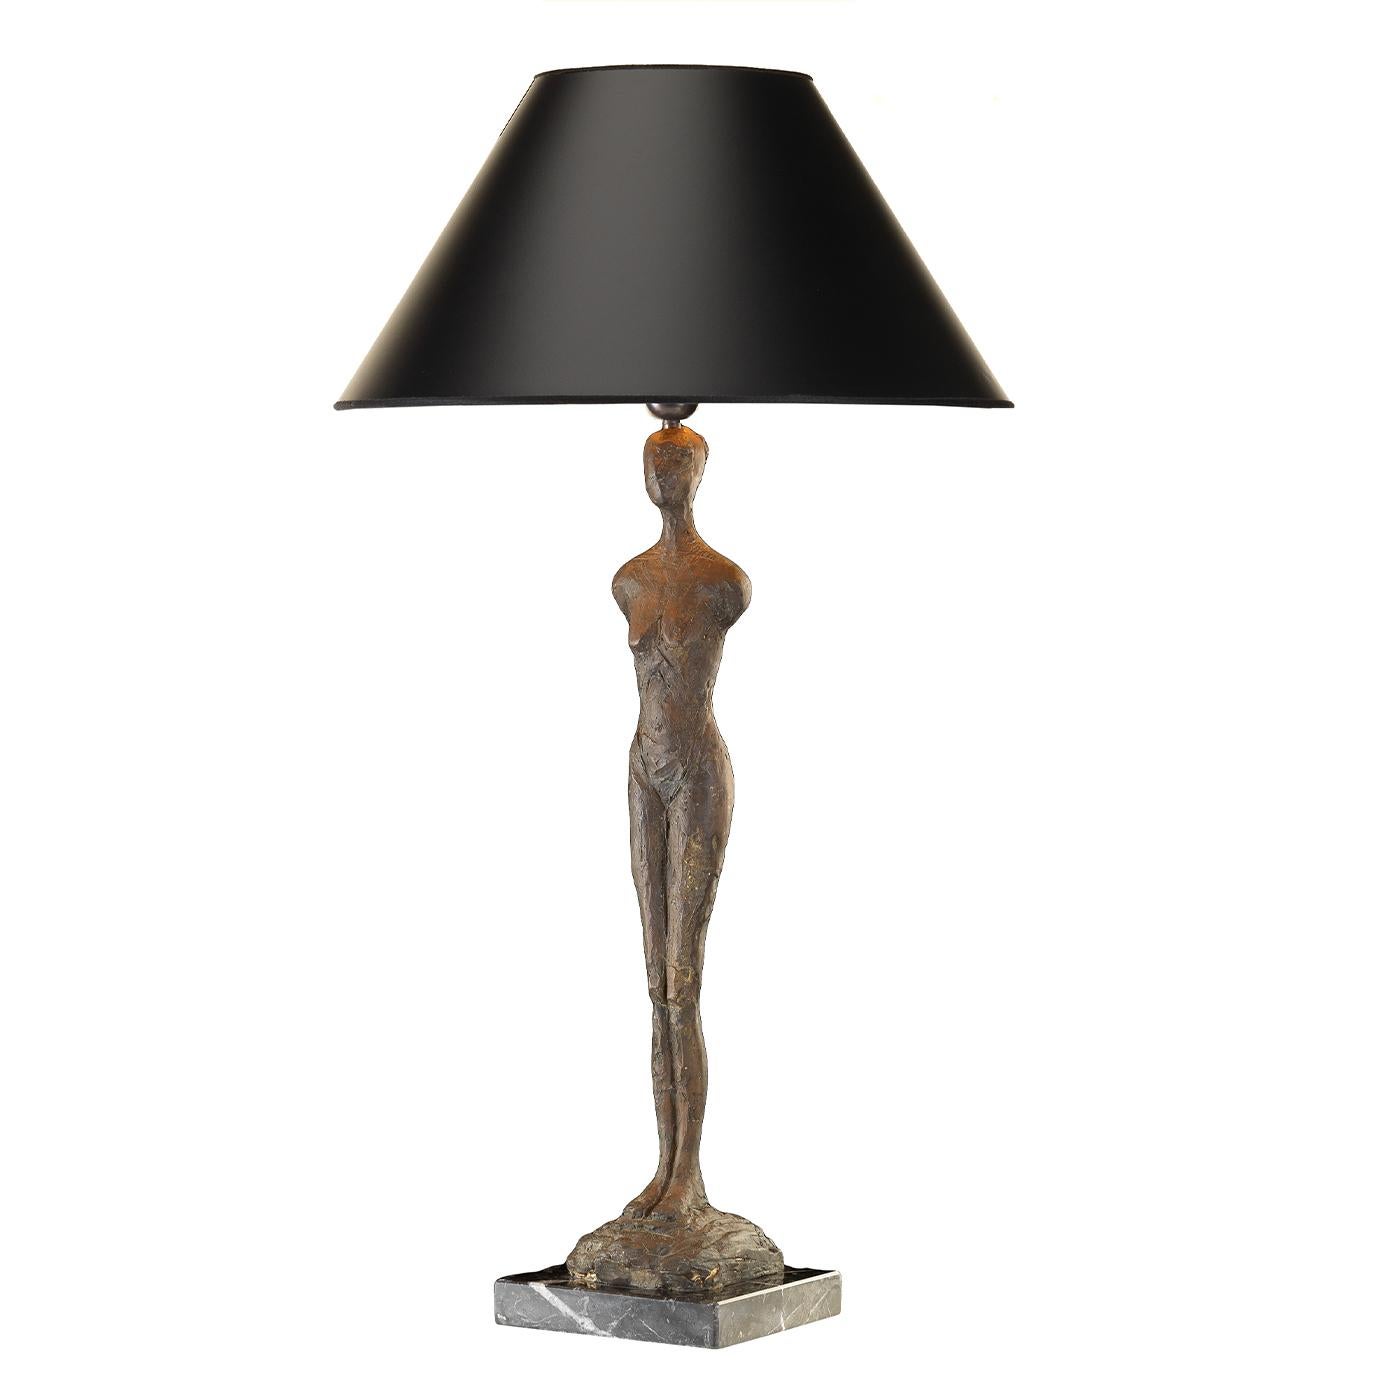 A superb display of Badari's creativity and craftsmanship, this exquisite table lamp celebrates the female form in an object of functional decor that will provide a stunning artistic accent in mid-century modern interiors. Raised on a square marble